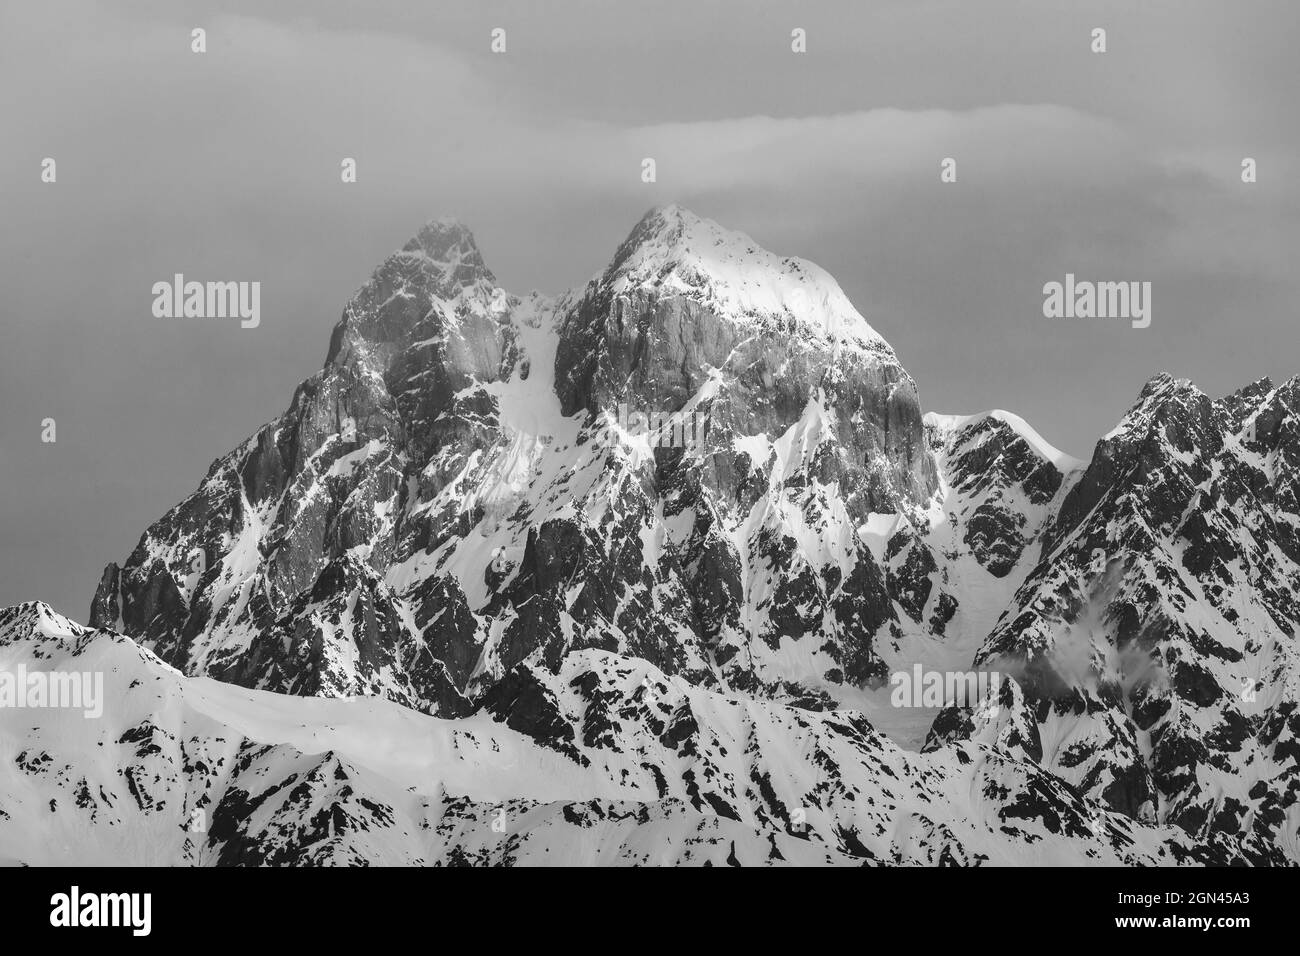 View of Mount Ushba. Ushba is one of the most notable peaks of the Caucasus range, located in the Svaneti region of Georgia. Travel. Stock Photo